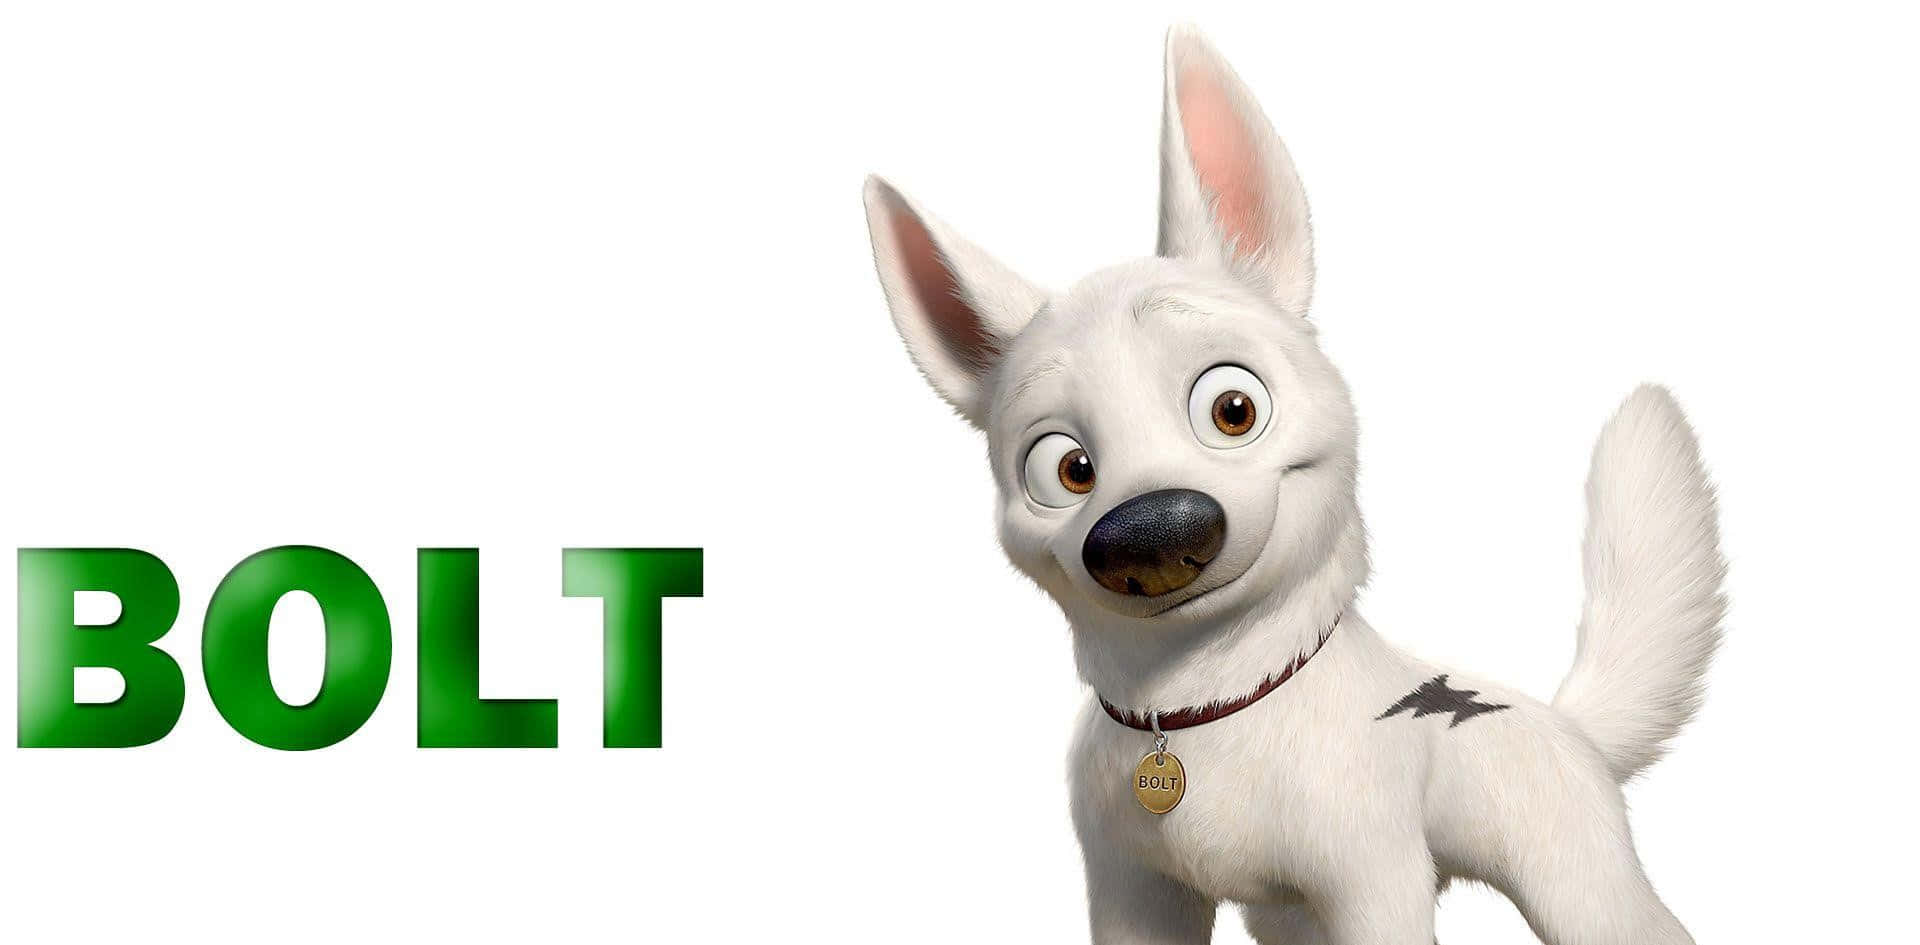 Bolt, the heroic dog, is ready for a new adventure!